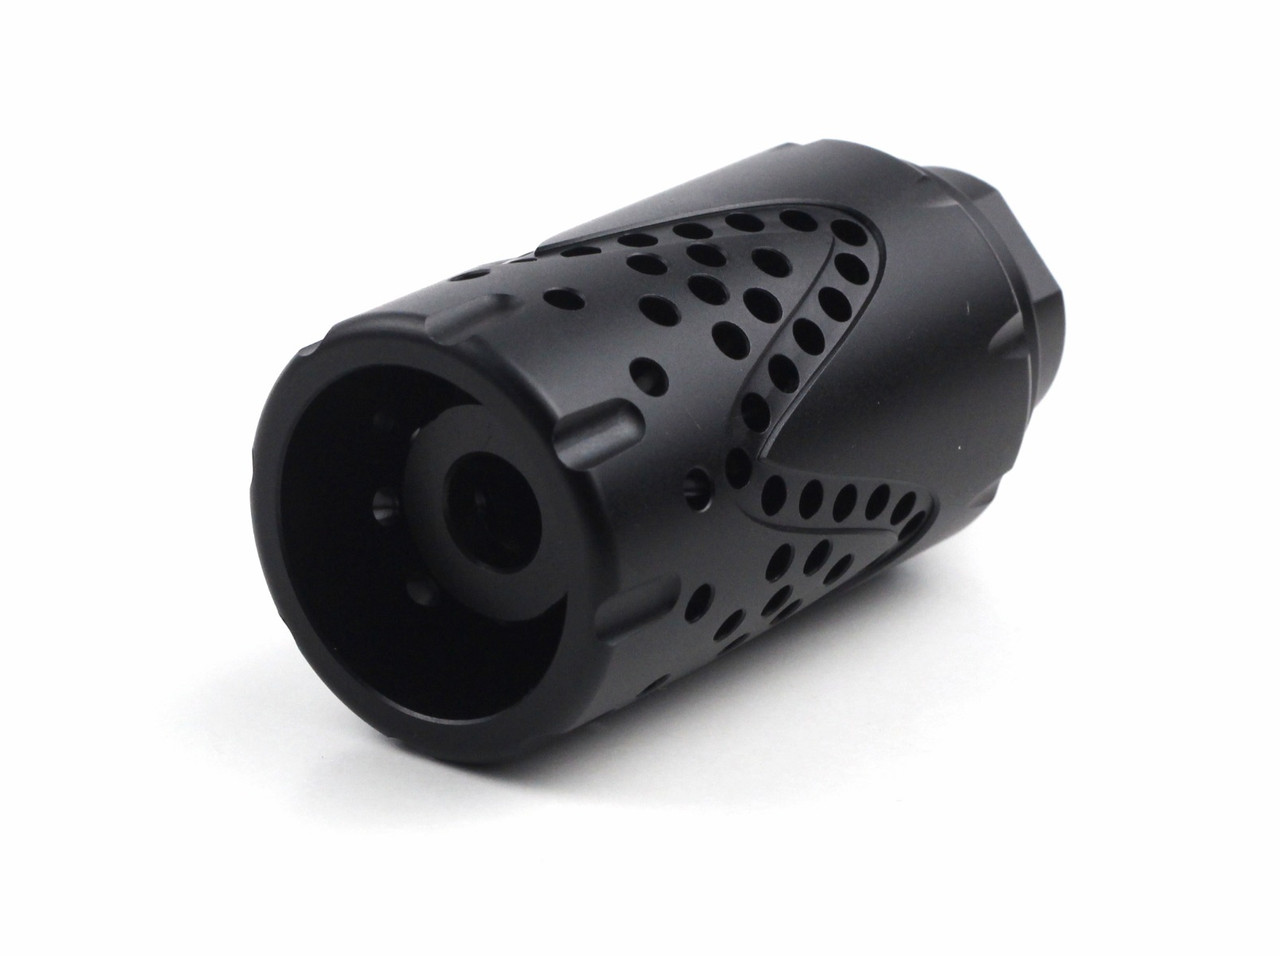 Tactical Muzzle Brake Device with Removable Shroud, 1/2"-28 & 5/8"-24 Thread Pitches